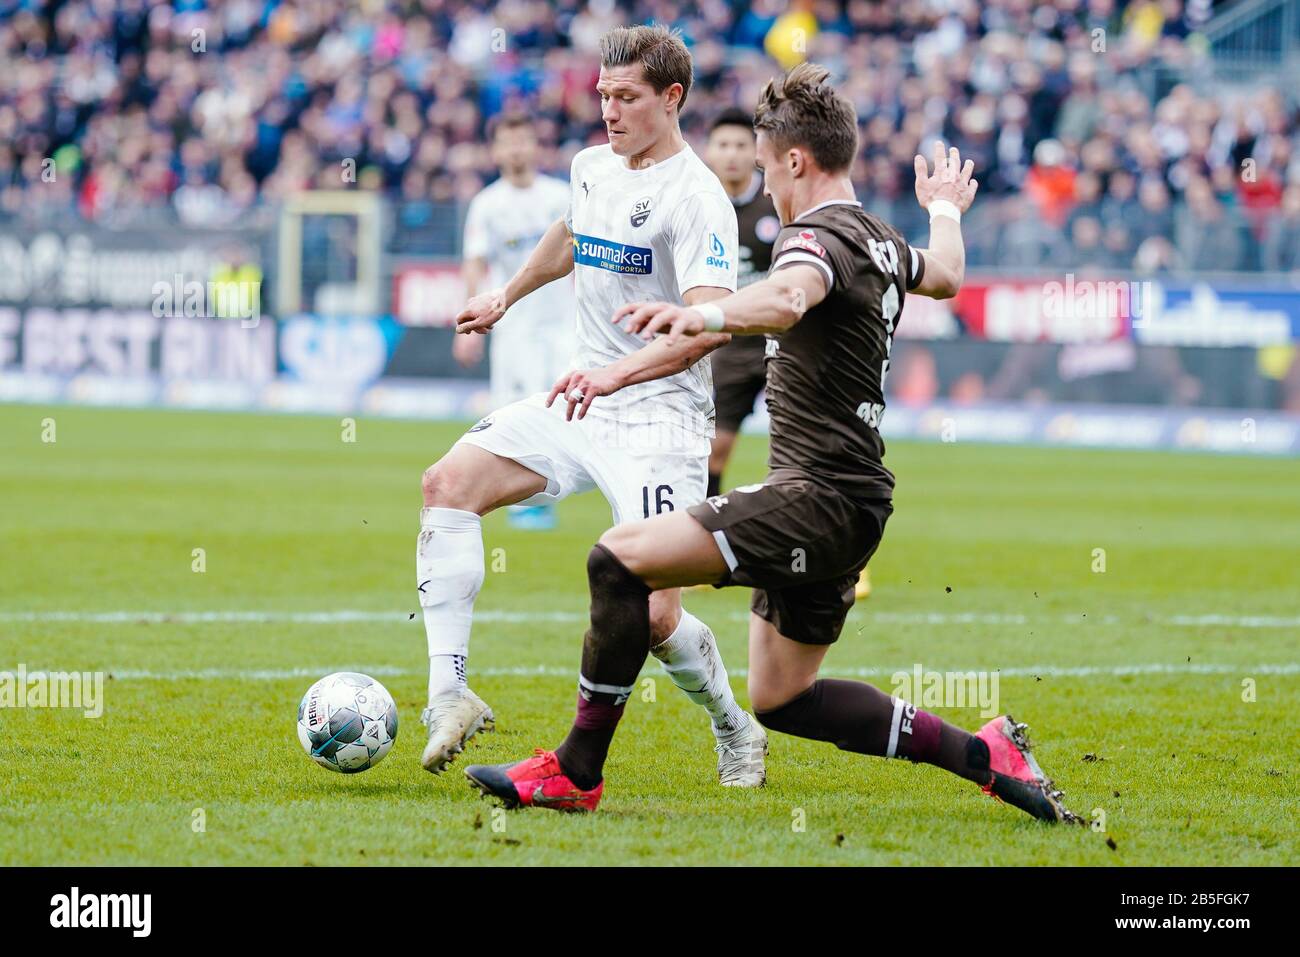 Sandhausen, Germany. 08th Mar, 2020. Football: 2nd Bundesliga, 25th matchday, SV Sandhausen - FC St. Pauli, Hardtwaldstadion. Sandhausen's Kevin Behrens (l) and St. Paulis Leo Östigard fight for the ball. Credit: Uwe Anspach/dpa - IMPORTANT NOTE: In accordance with the regulations of the DFL Deutsche Fußball Liga and the DFB Deutscher Fußball-Bund, it is prohibited to exploit or have exploited in the stadium and/or from the game taken photographs in the form of sequence images and/or video-like photo series./dpa/Alamy Live News Stock Photo